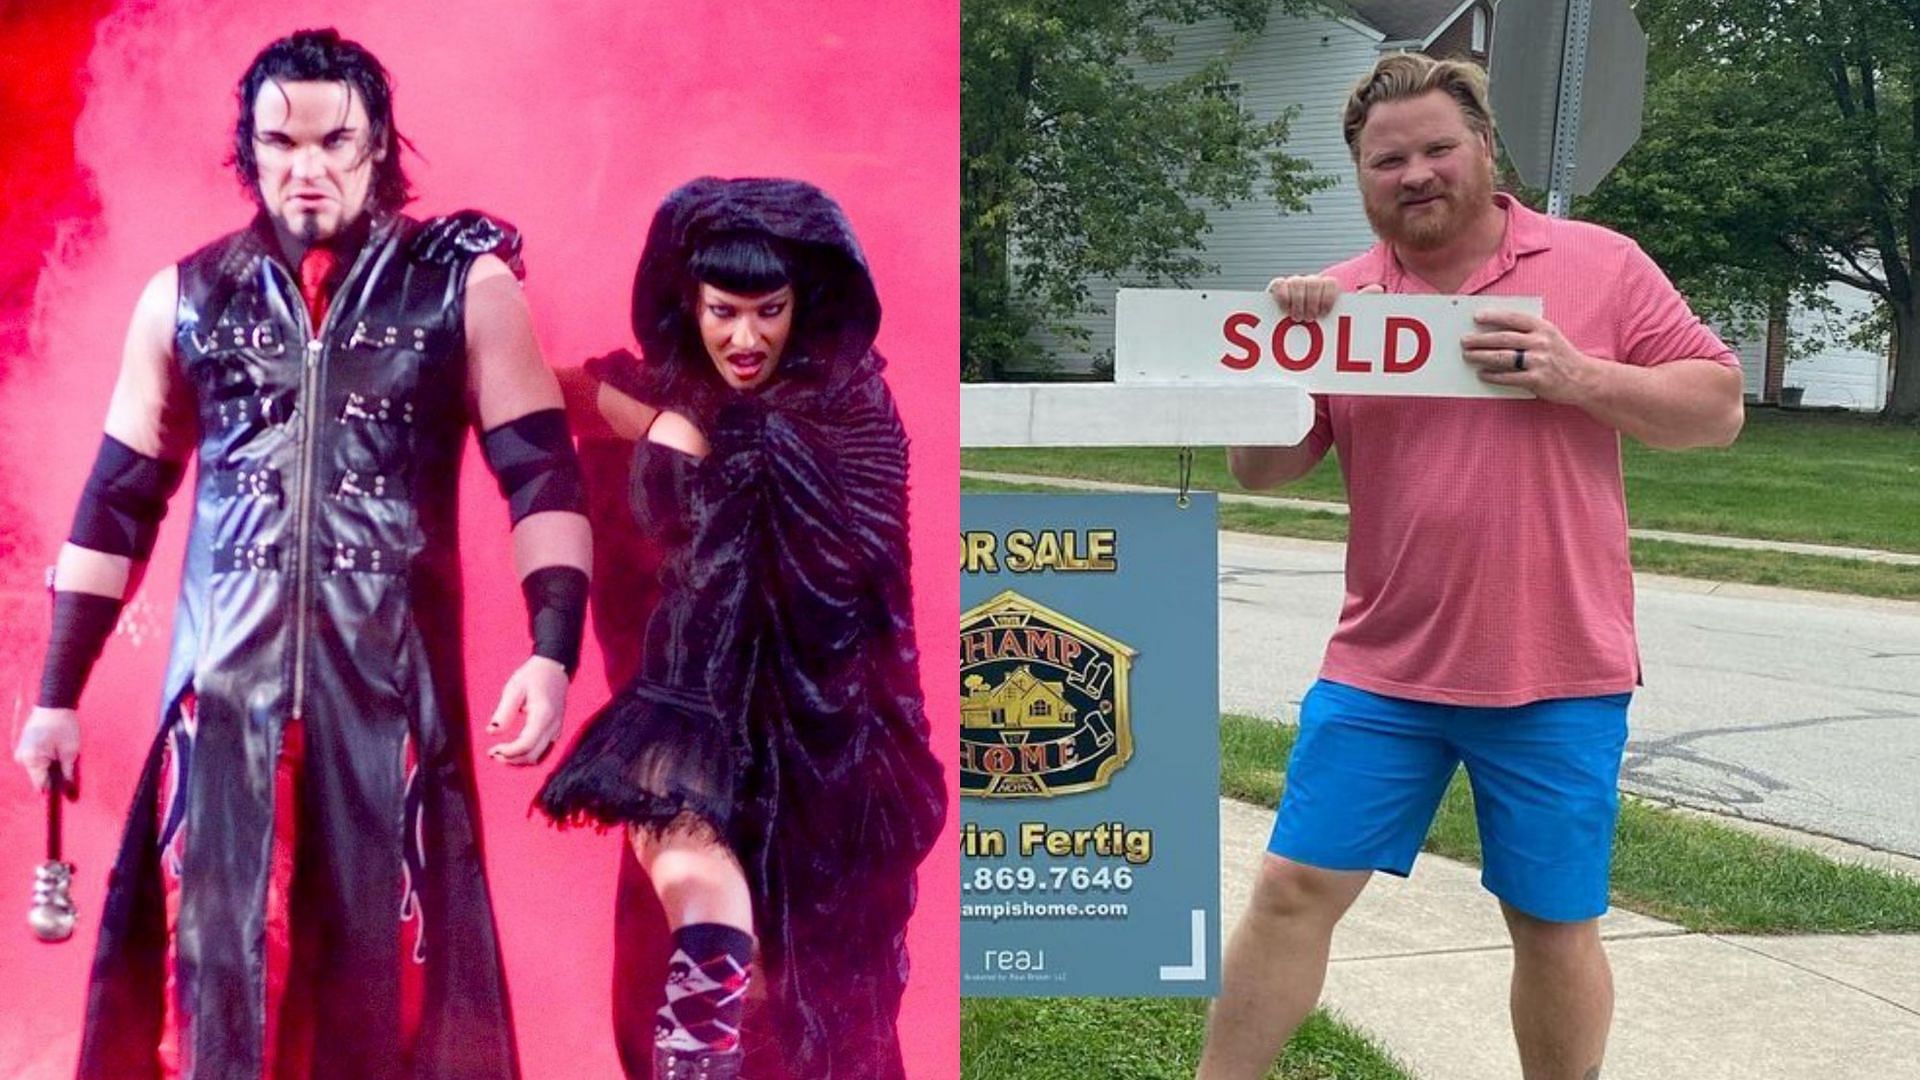 Former ECW star Kevin Thorn is now a real estate agent